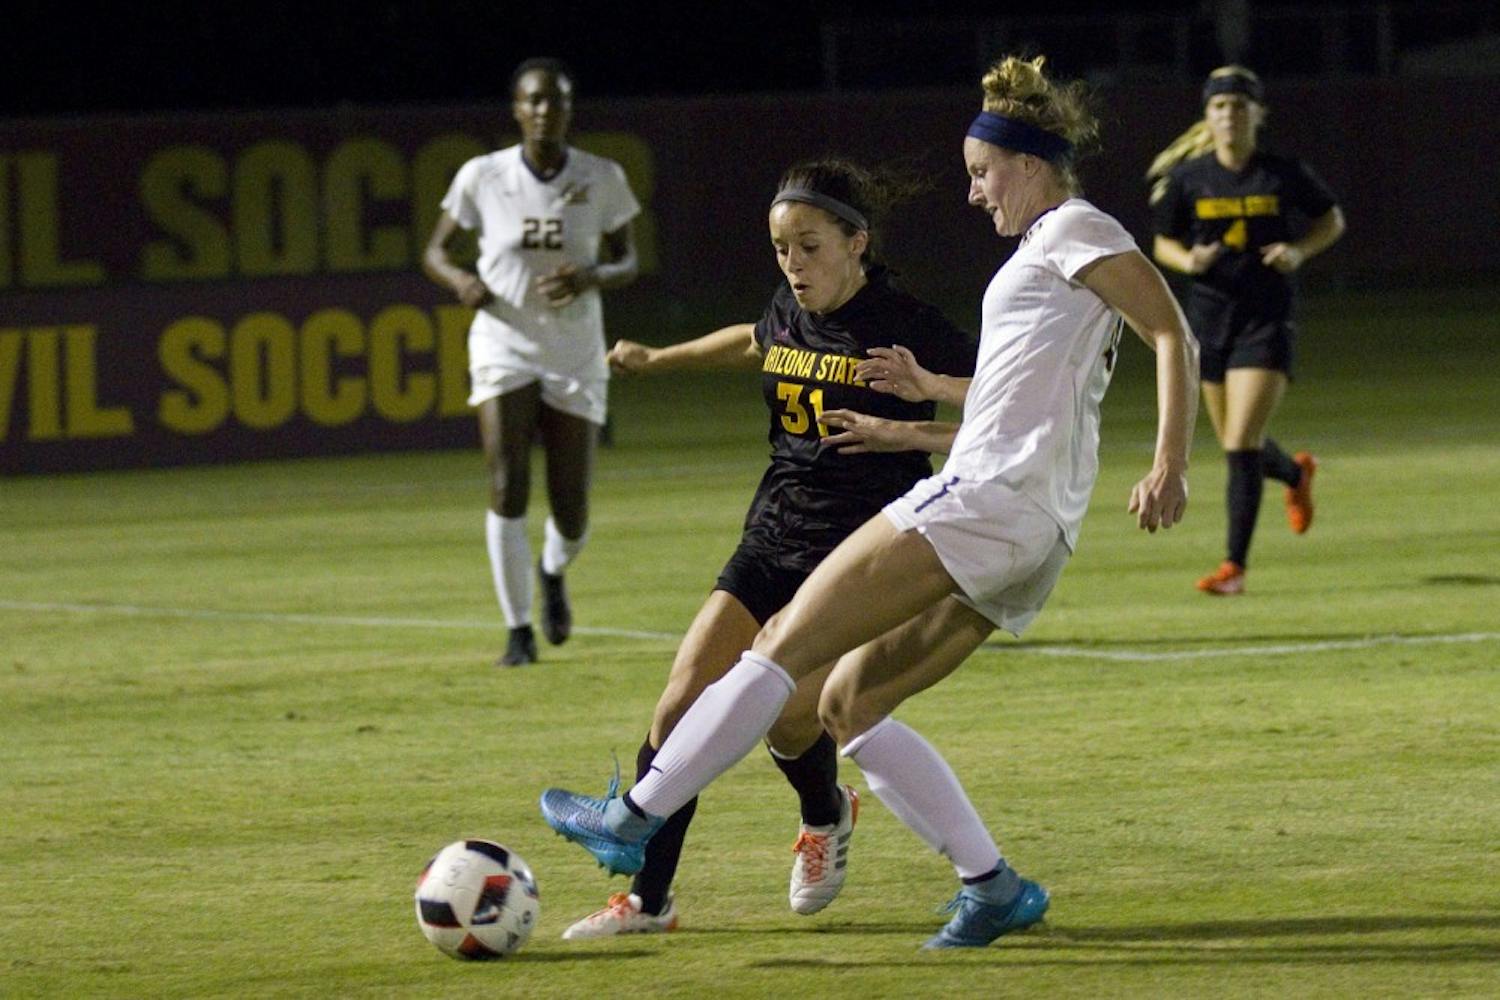 ASU sophomore forward Jaimie Salas (31) looks to push the ball upfield in the second half of a 2-0 loss California in Sun Devil Soccer Stadium in Tempe, Arizona, on Thursday, Oct. 27, 2016.